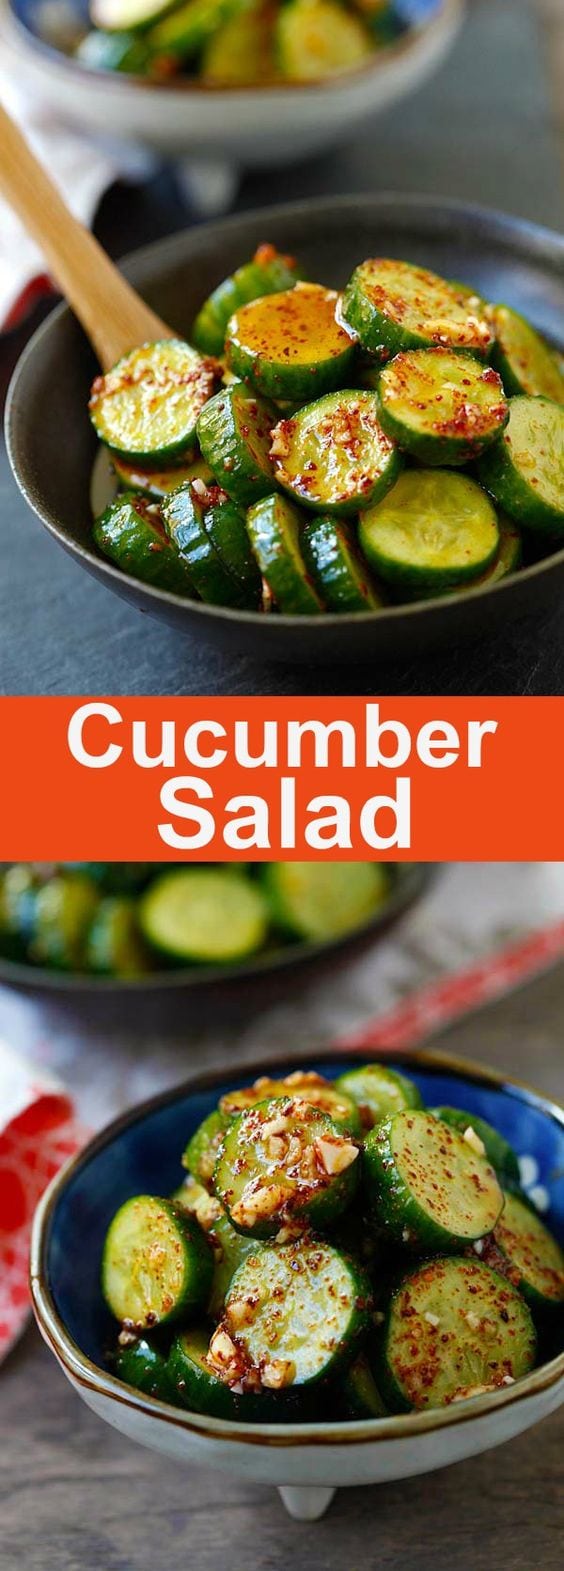 Asian Cucumber Salad – healthy cucumber salad with Asian spices. So refreshing and easy. A perfect appetizer for any meals | rasamalaysia.com